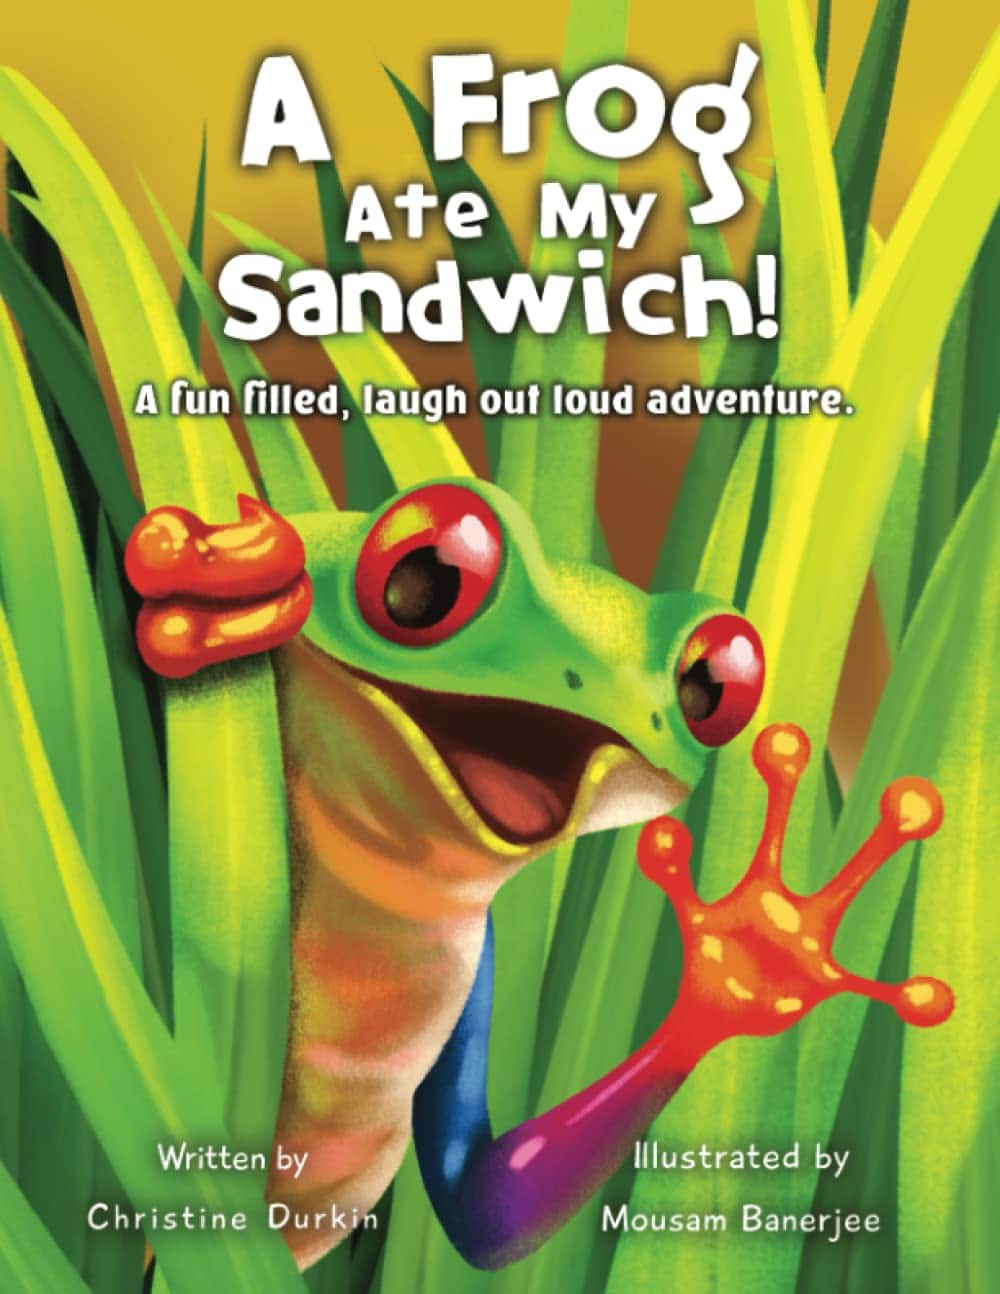 "A Frog Ate My Sandwich!" Book Cover